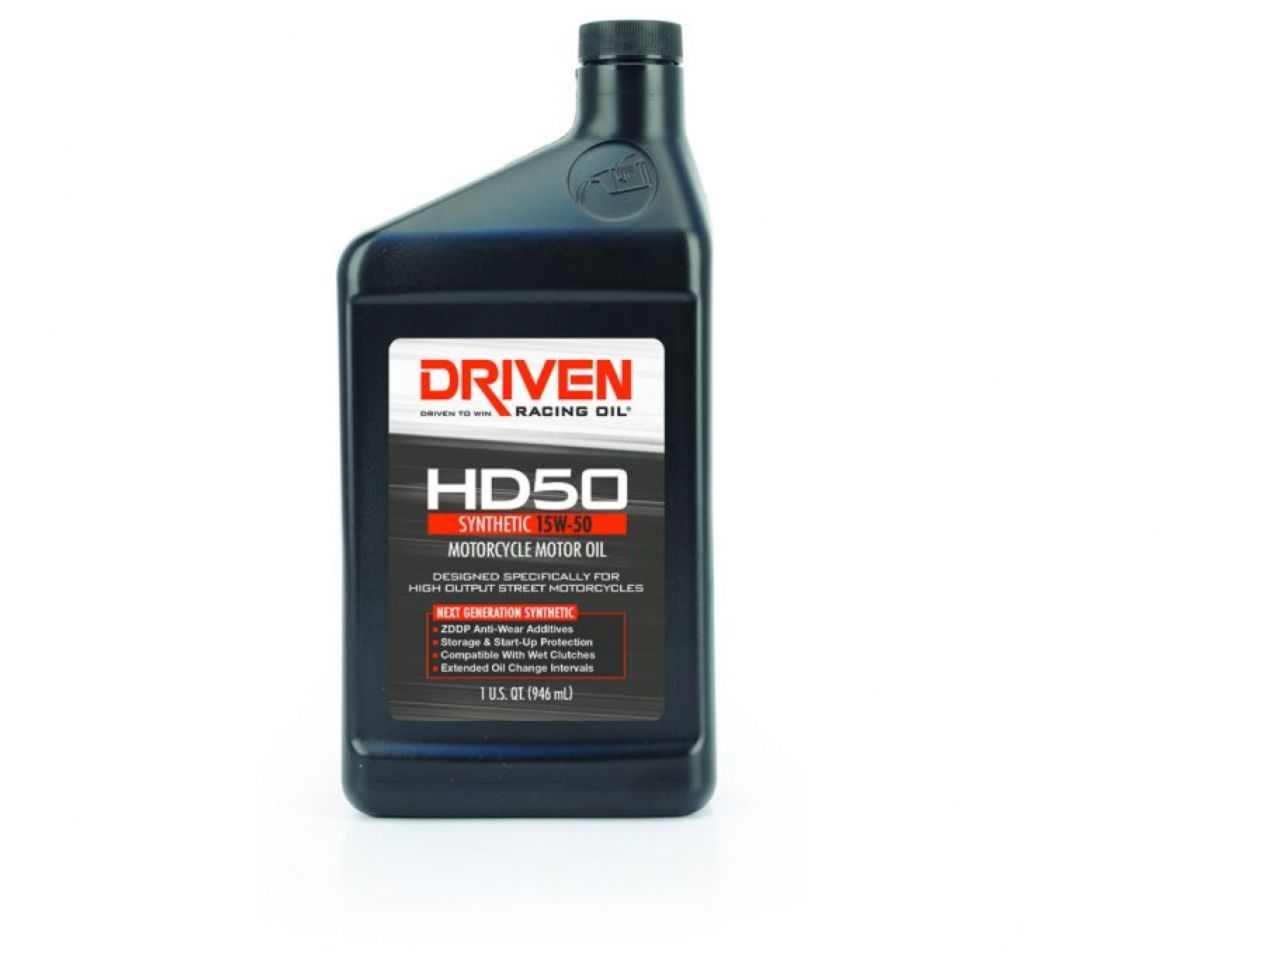 Driven Racing Oil Transmission Gear Oil 02706 Item Image